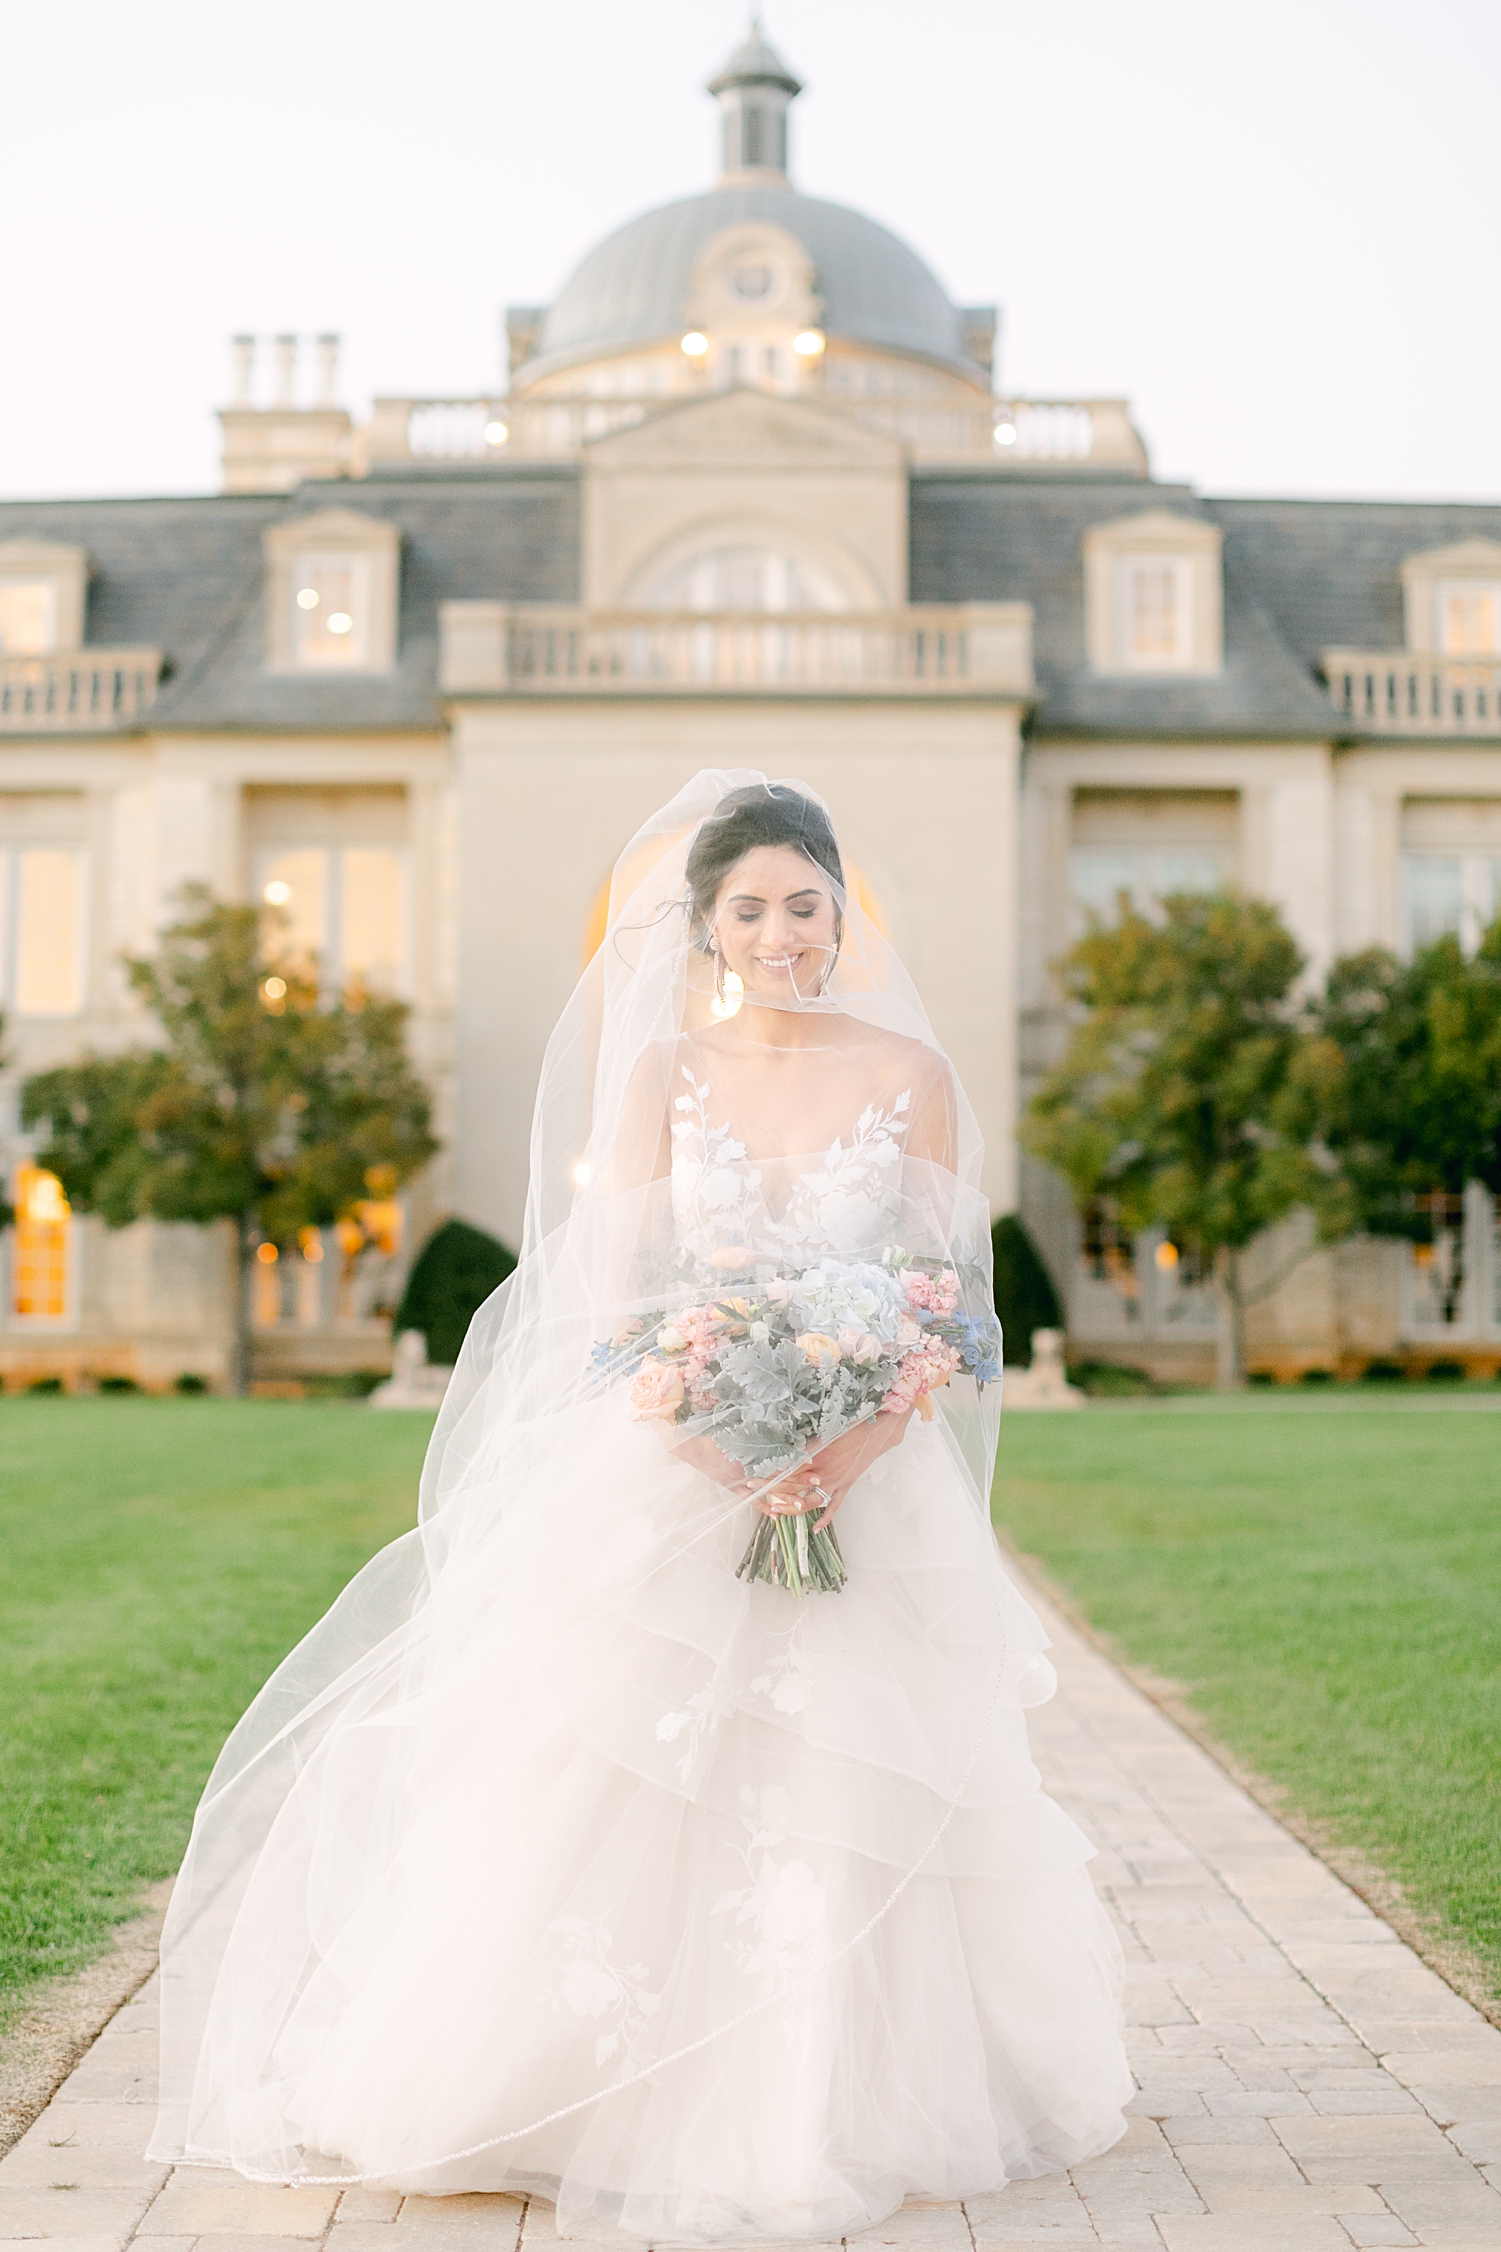 Bride holding bouquet in front of mansion at french estate wedding at sunset